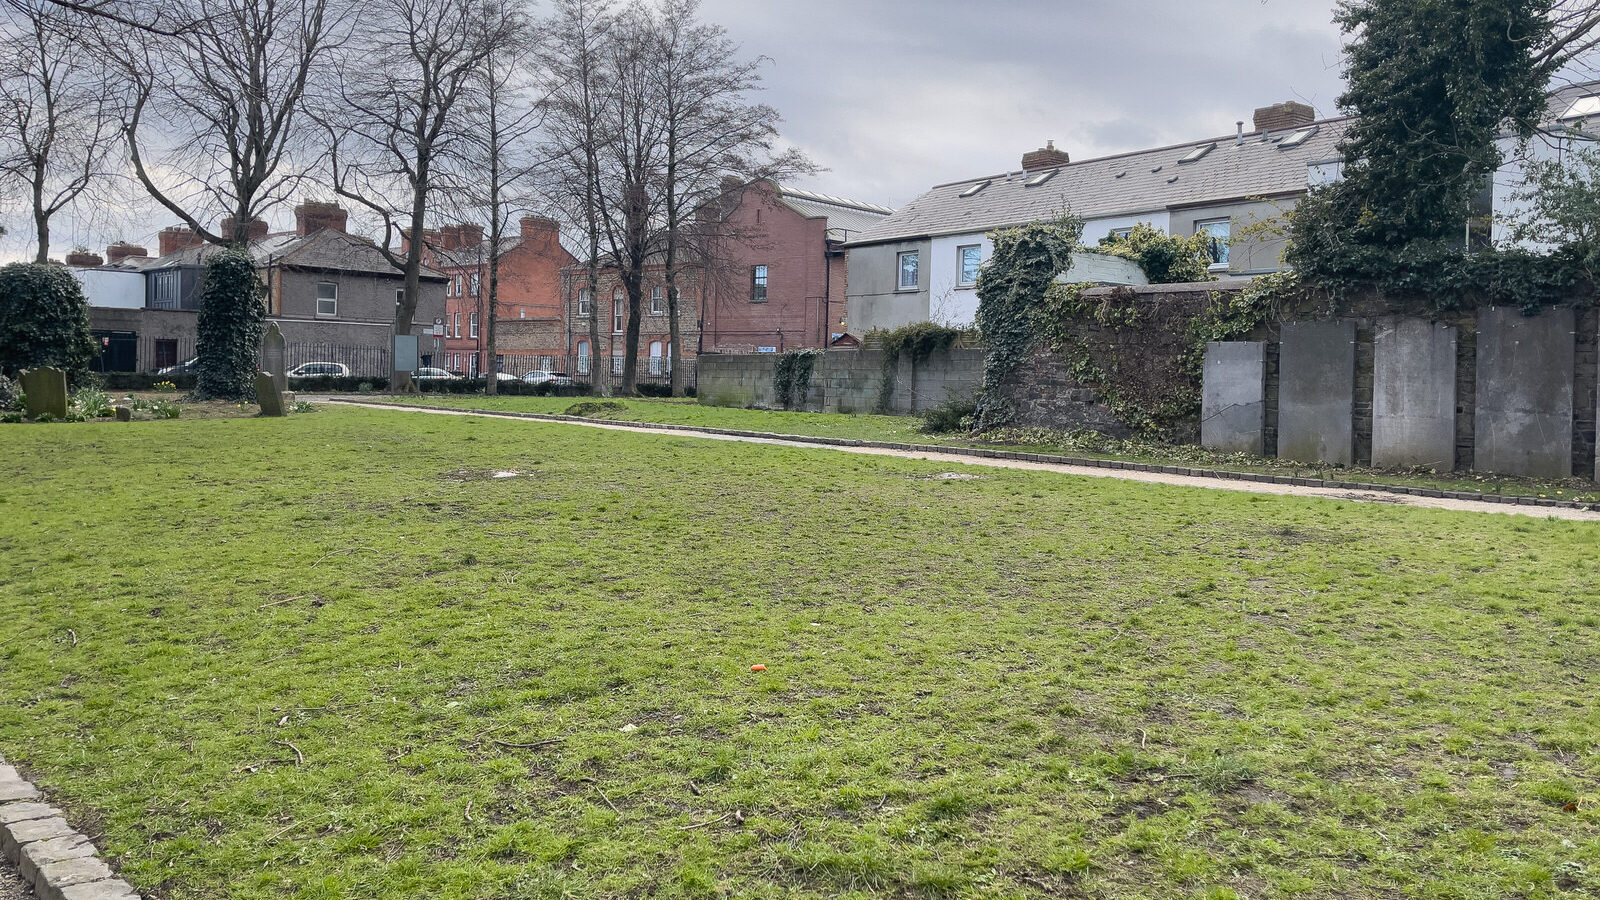 THIS SMALL PUBLIC PARK WAS ONCE A GRAVEYARD [ST CATHERINE'S ON THOMAS STREET 3 MARCH 2024]-229111-1